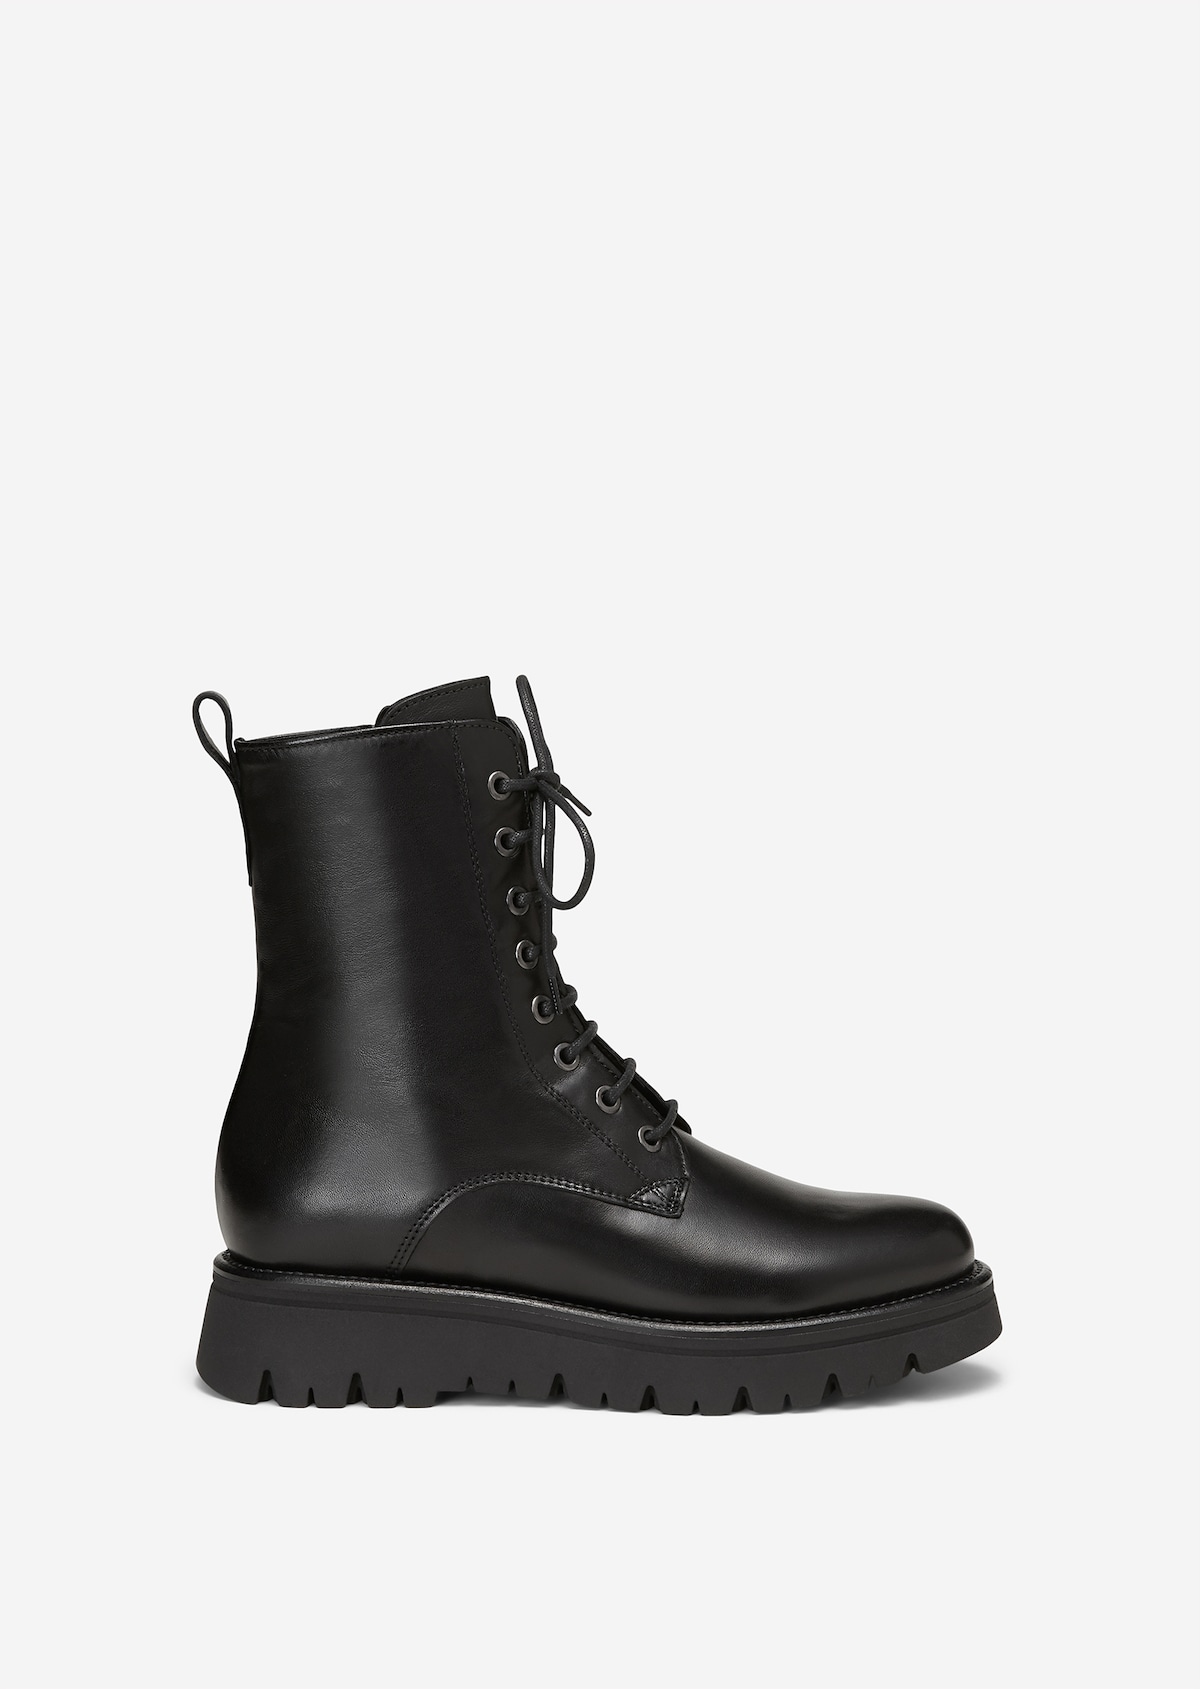 Lace up boots with lightweight cleated sole - black | Lace-up boots ...